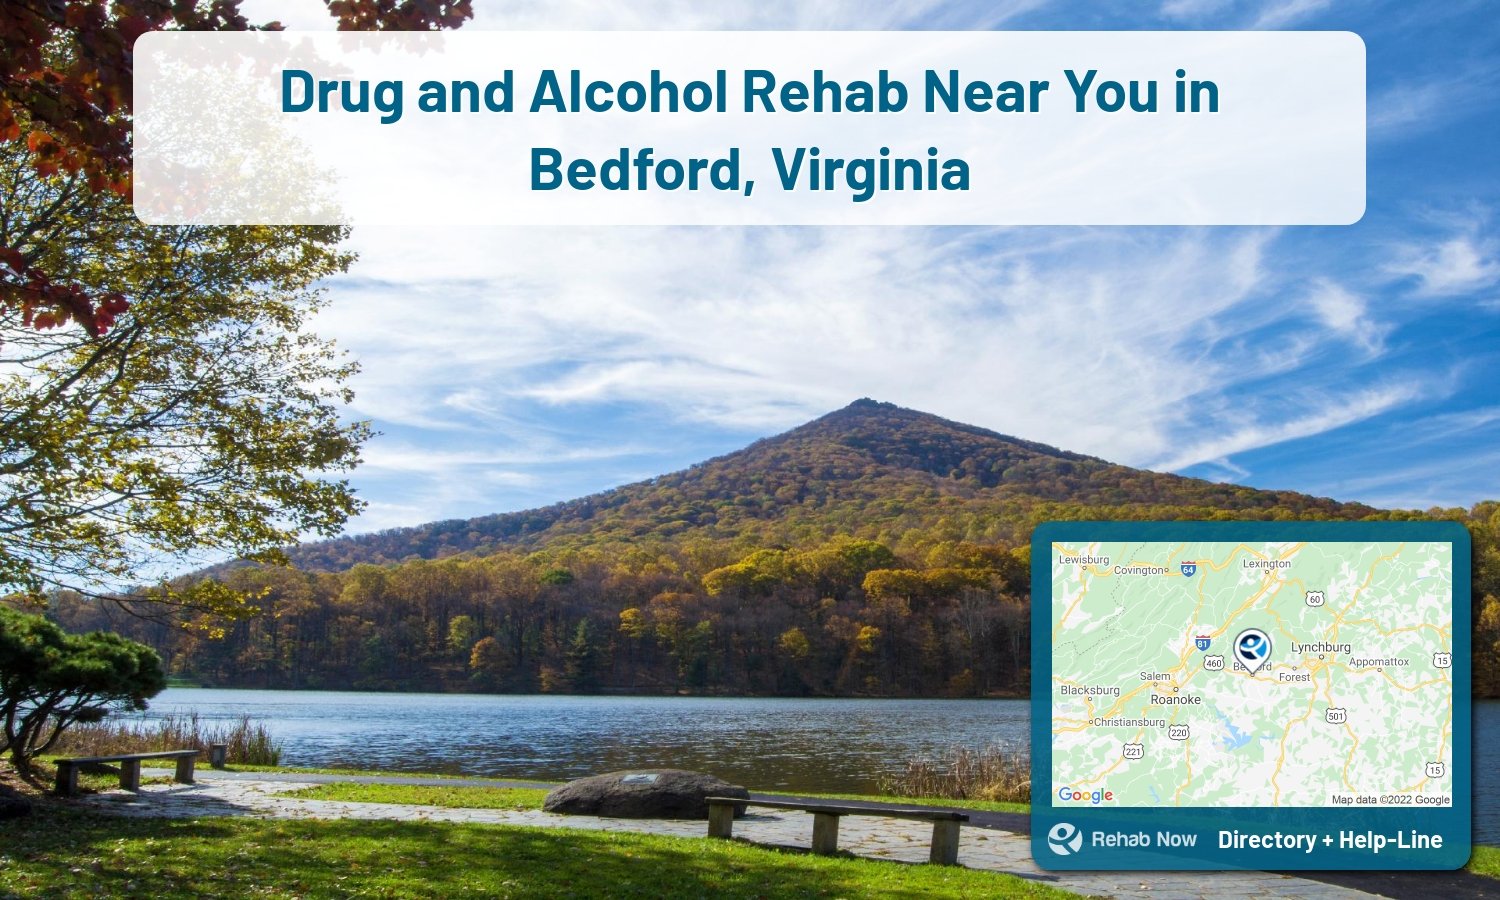 Find drug rehab and alcohol treatment services in Bedford. Our experts help you find a center in Bedford, Virginia